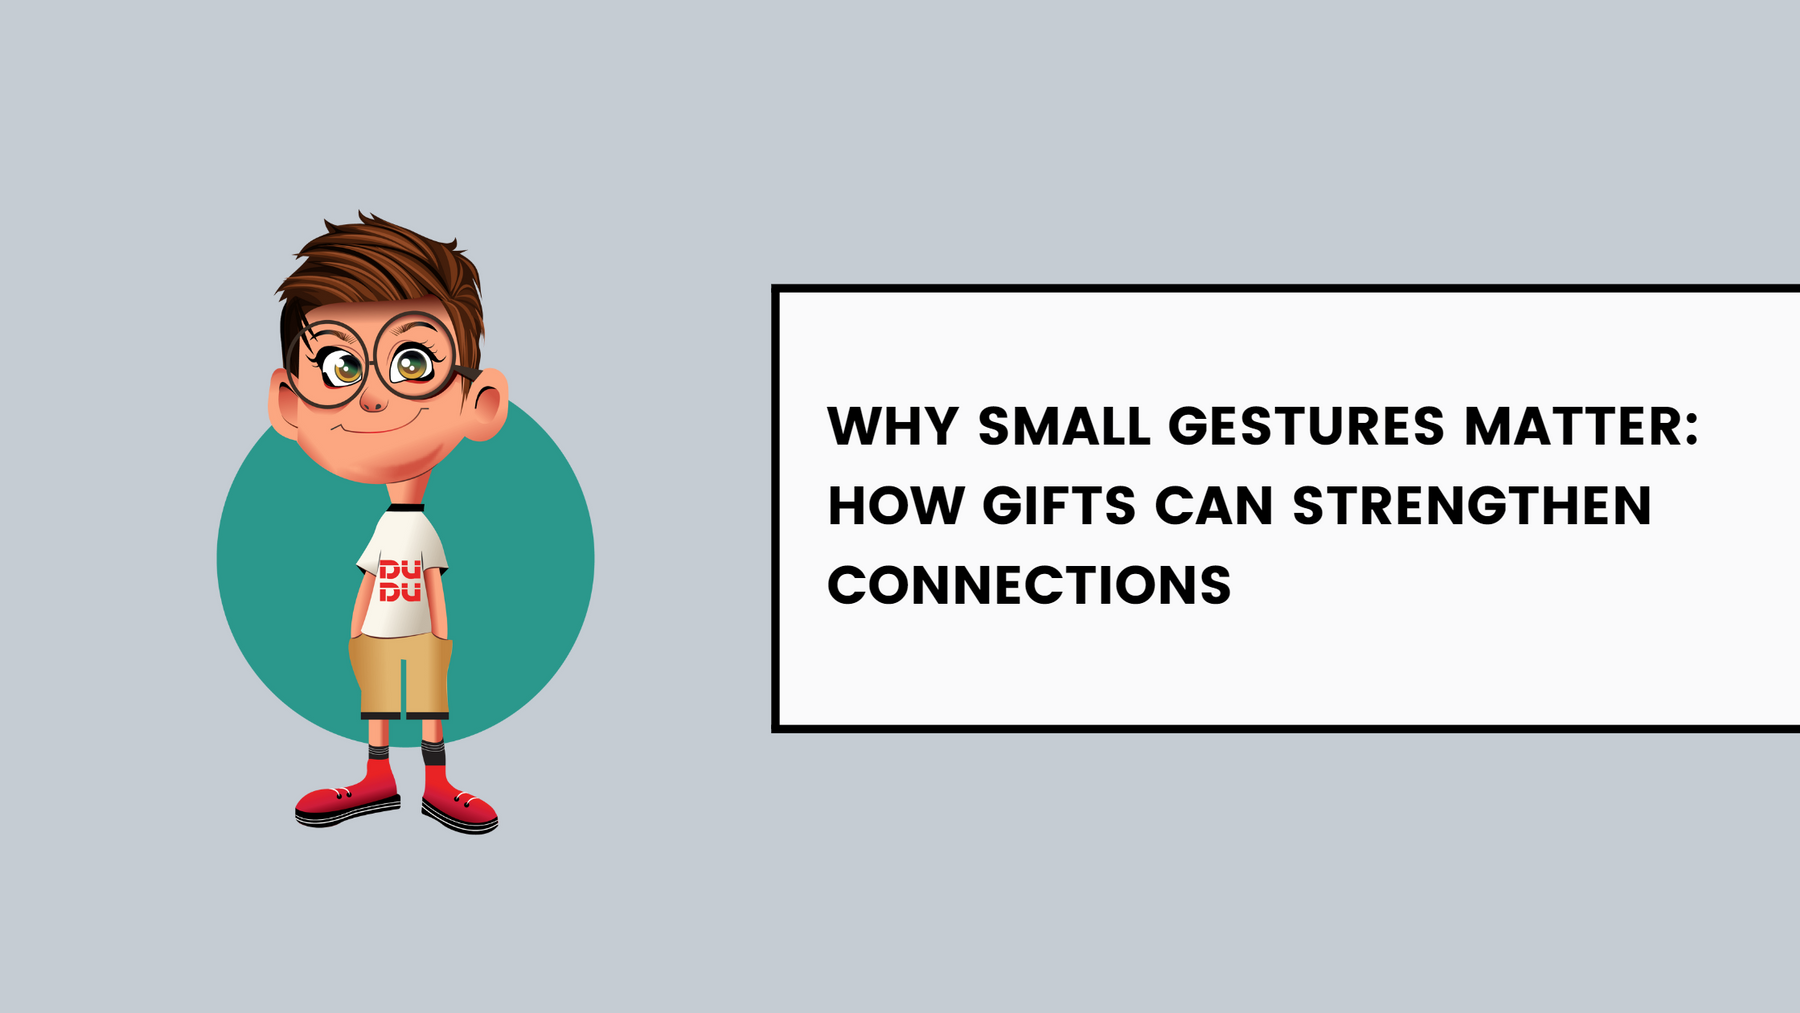 Why Small Gestures Matter: How Gifts Can Strengthen Connections